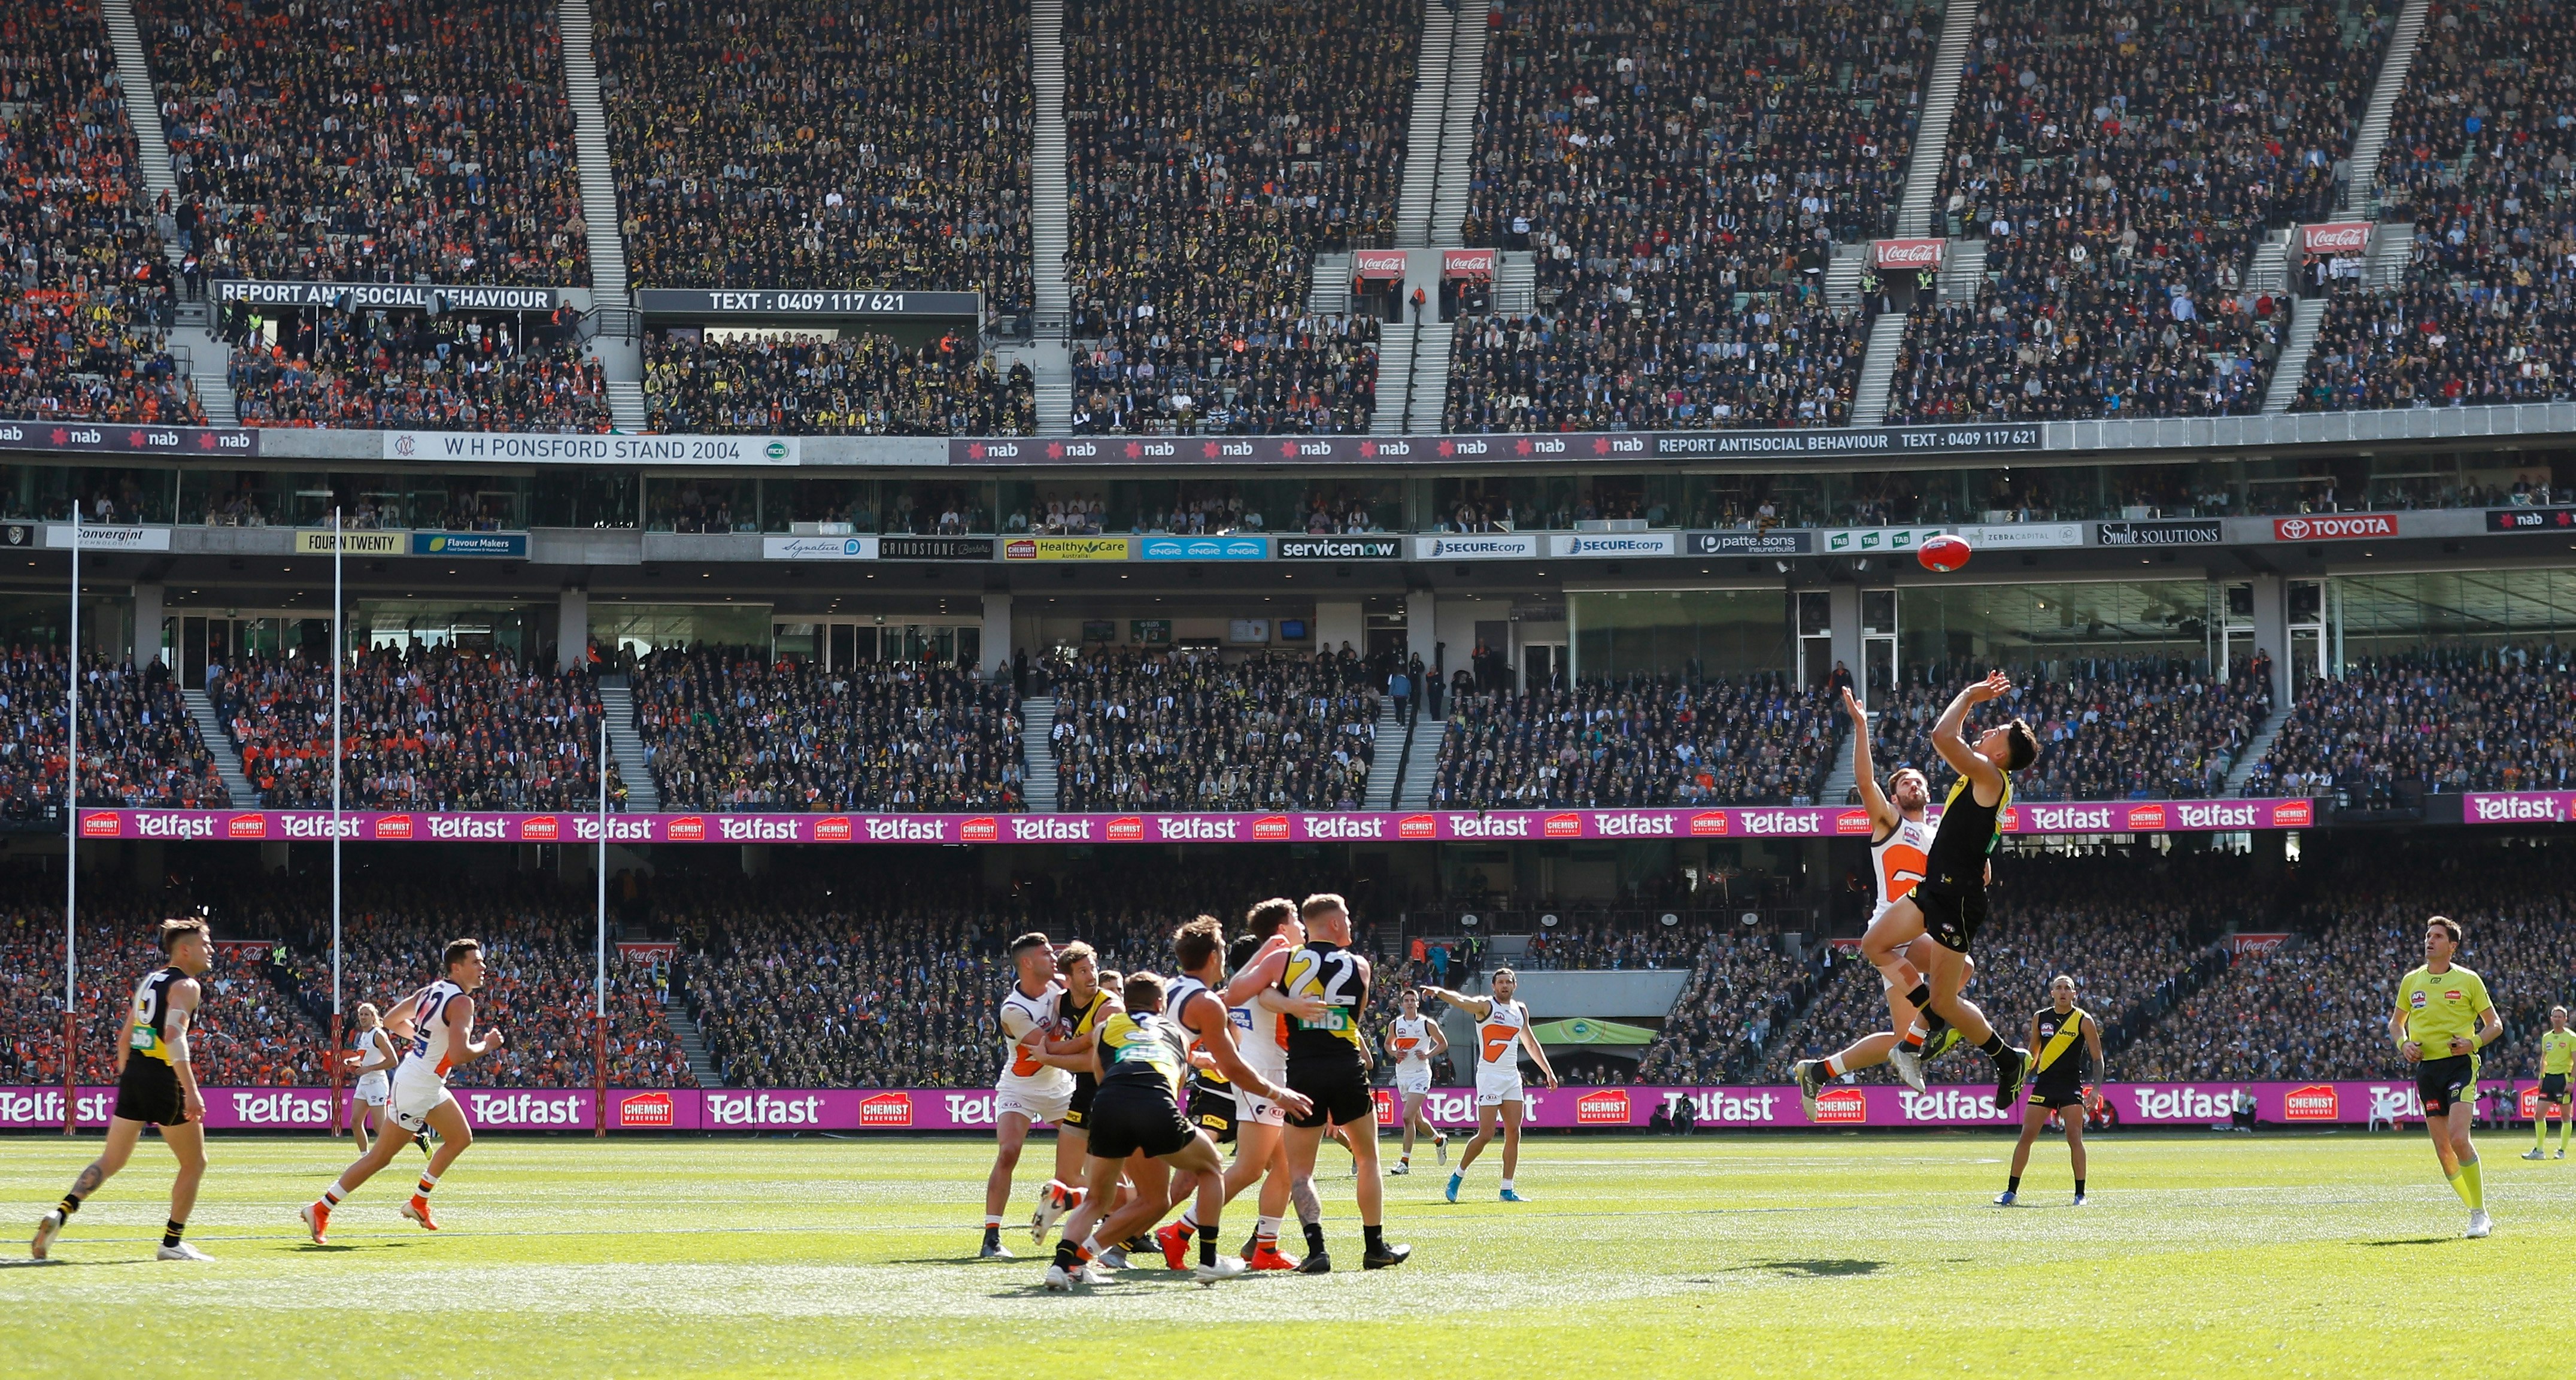 Stands full of spectators watch two teams competing in Australian Rules Football at the MCG in Melbourne.